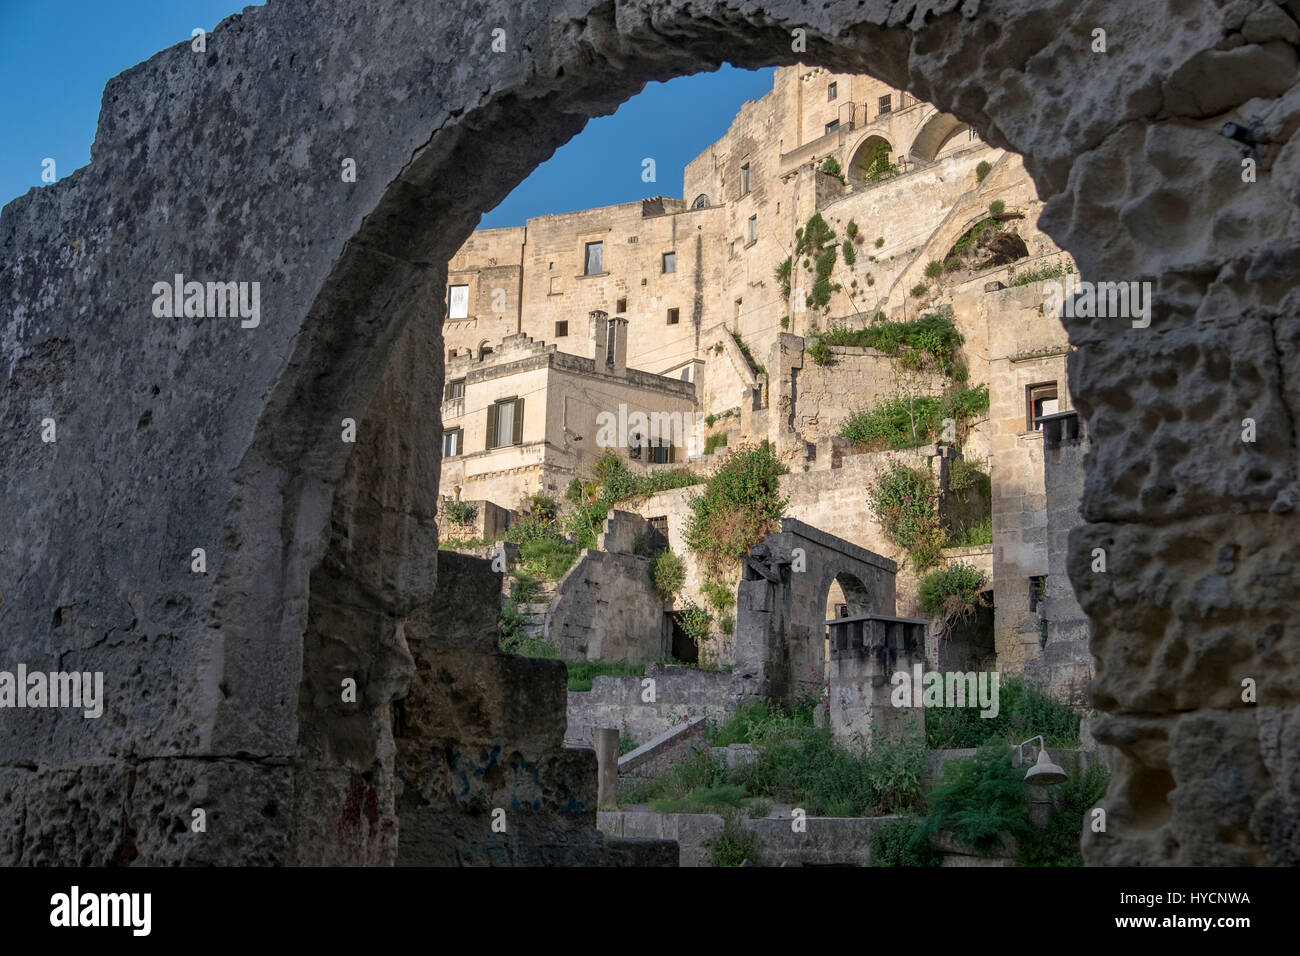 View of Matera, Italy, World Heritage Site and European Capital of Culture for 2019, as seen through a stone arch. Stock Photo